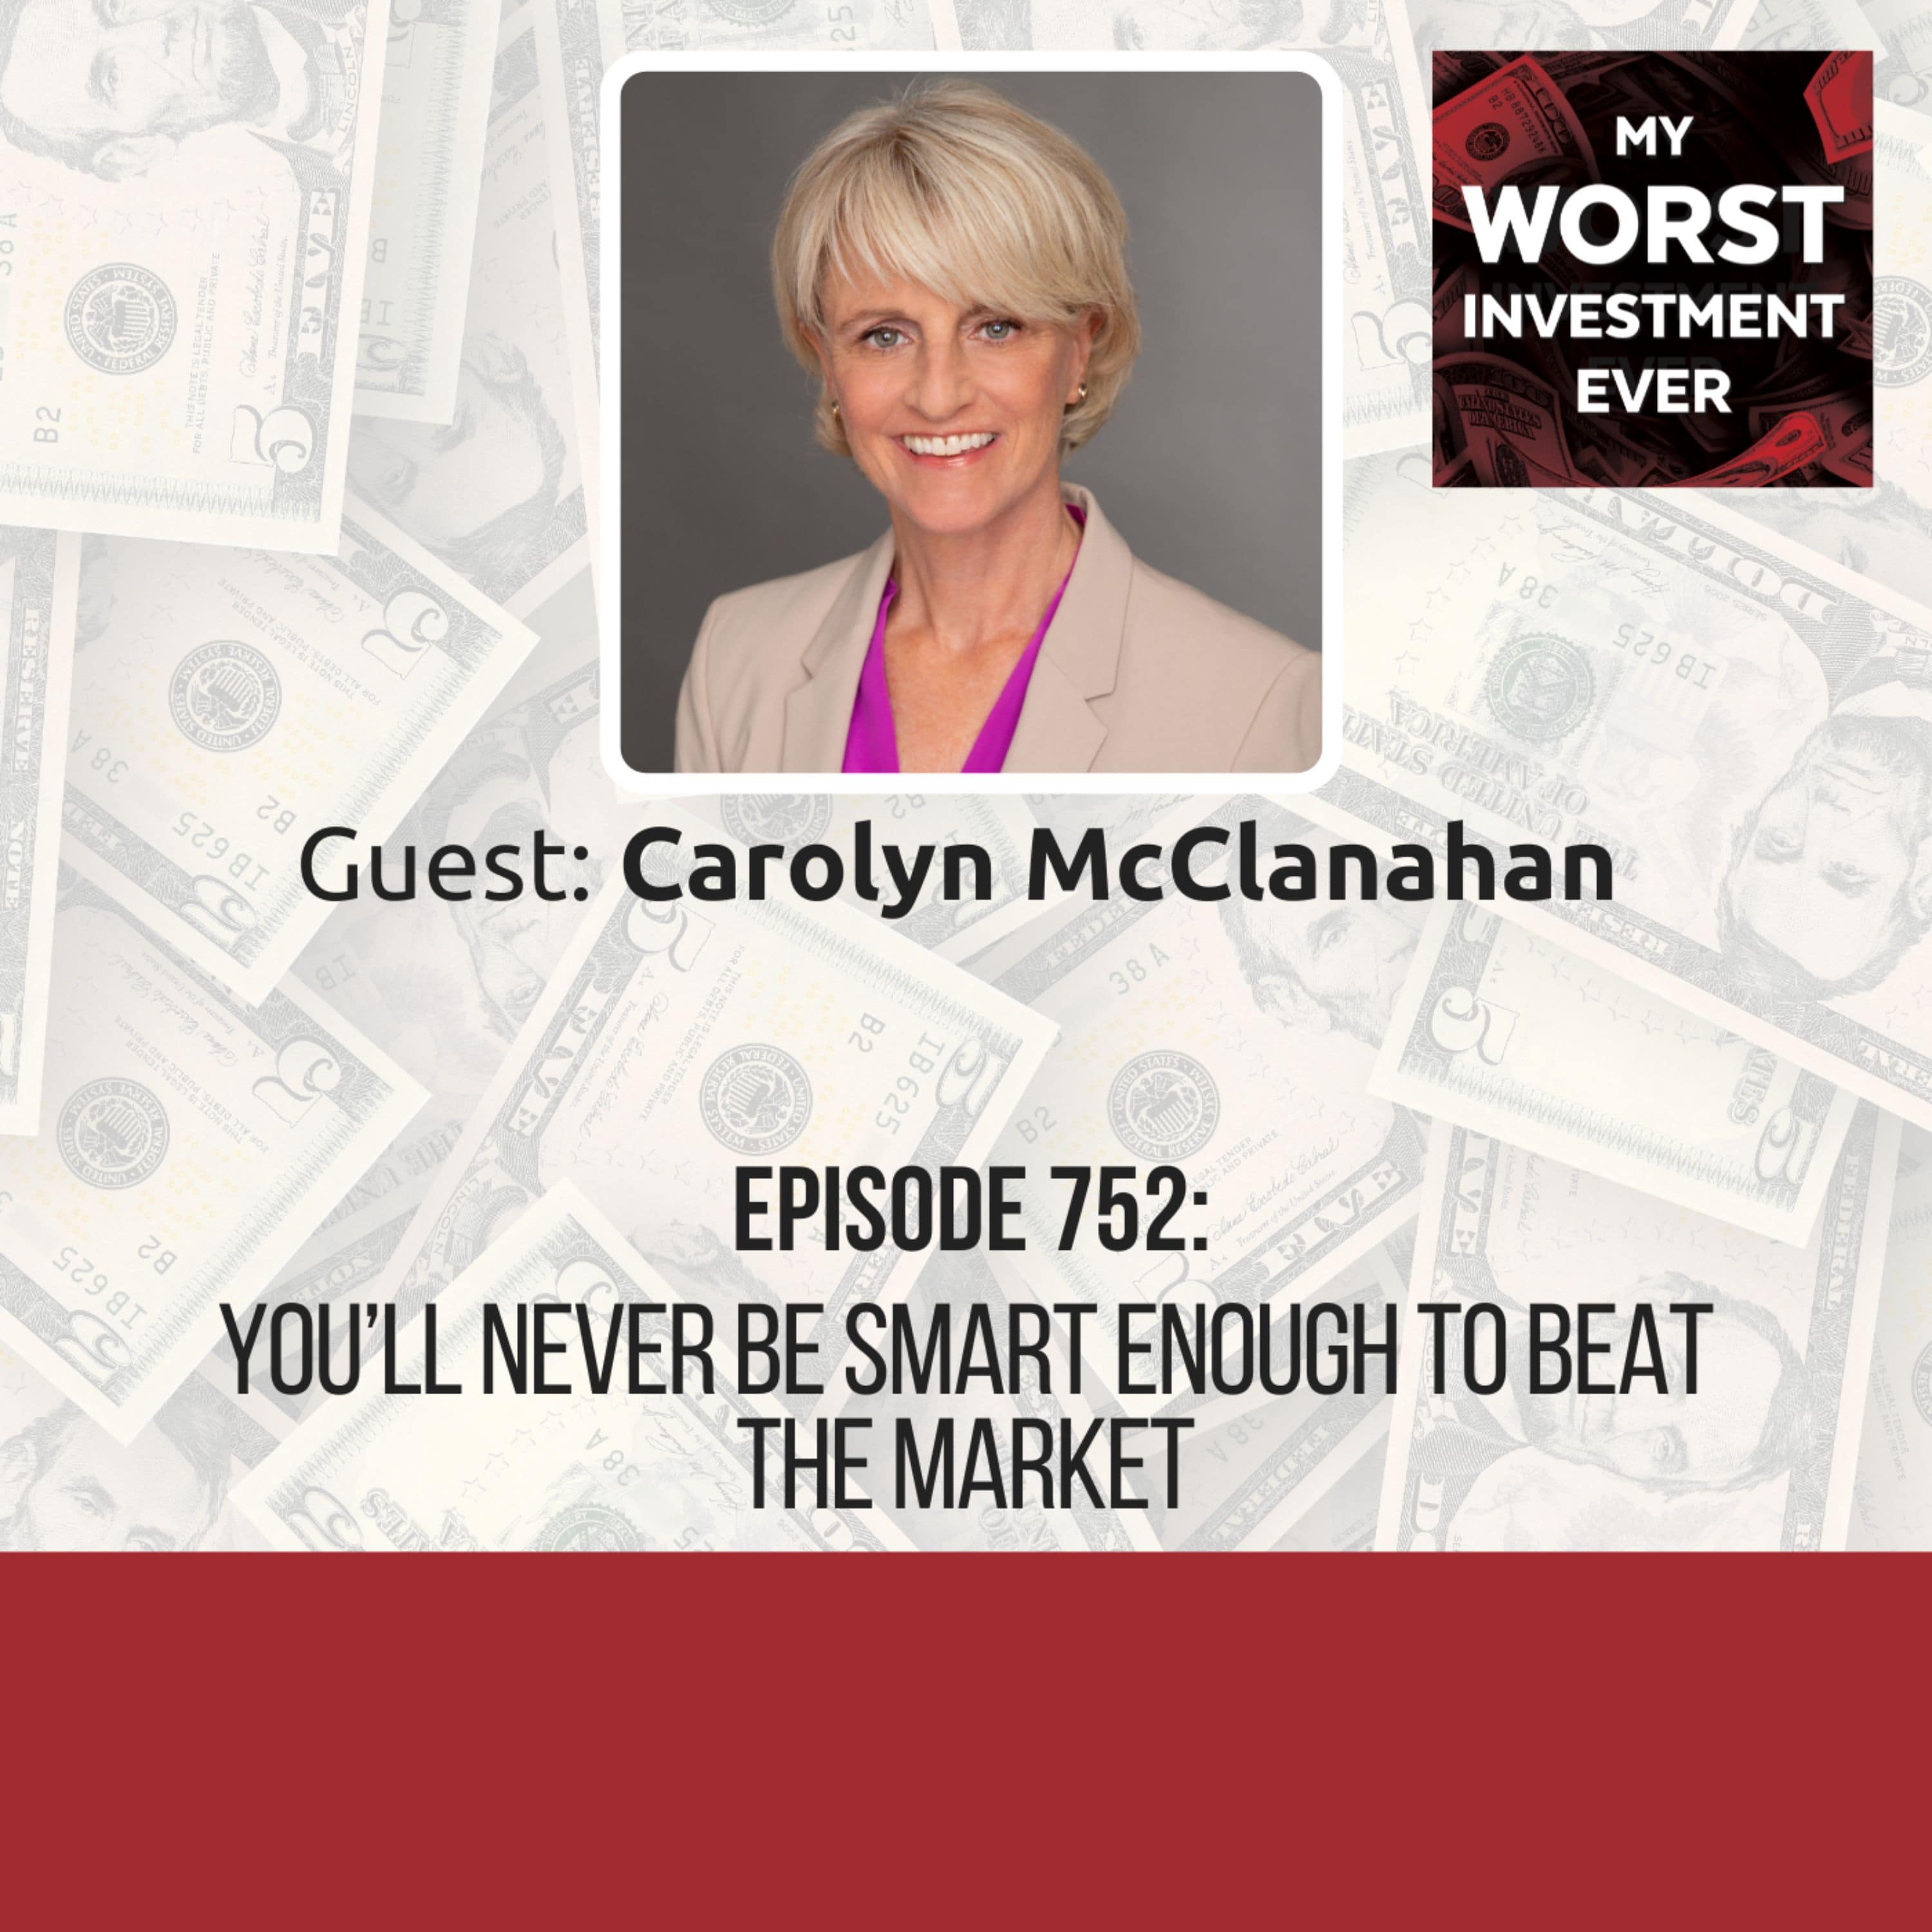 Carolyn McClanahan – You’ll Never Be Smart Enough to Beat the Market